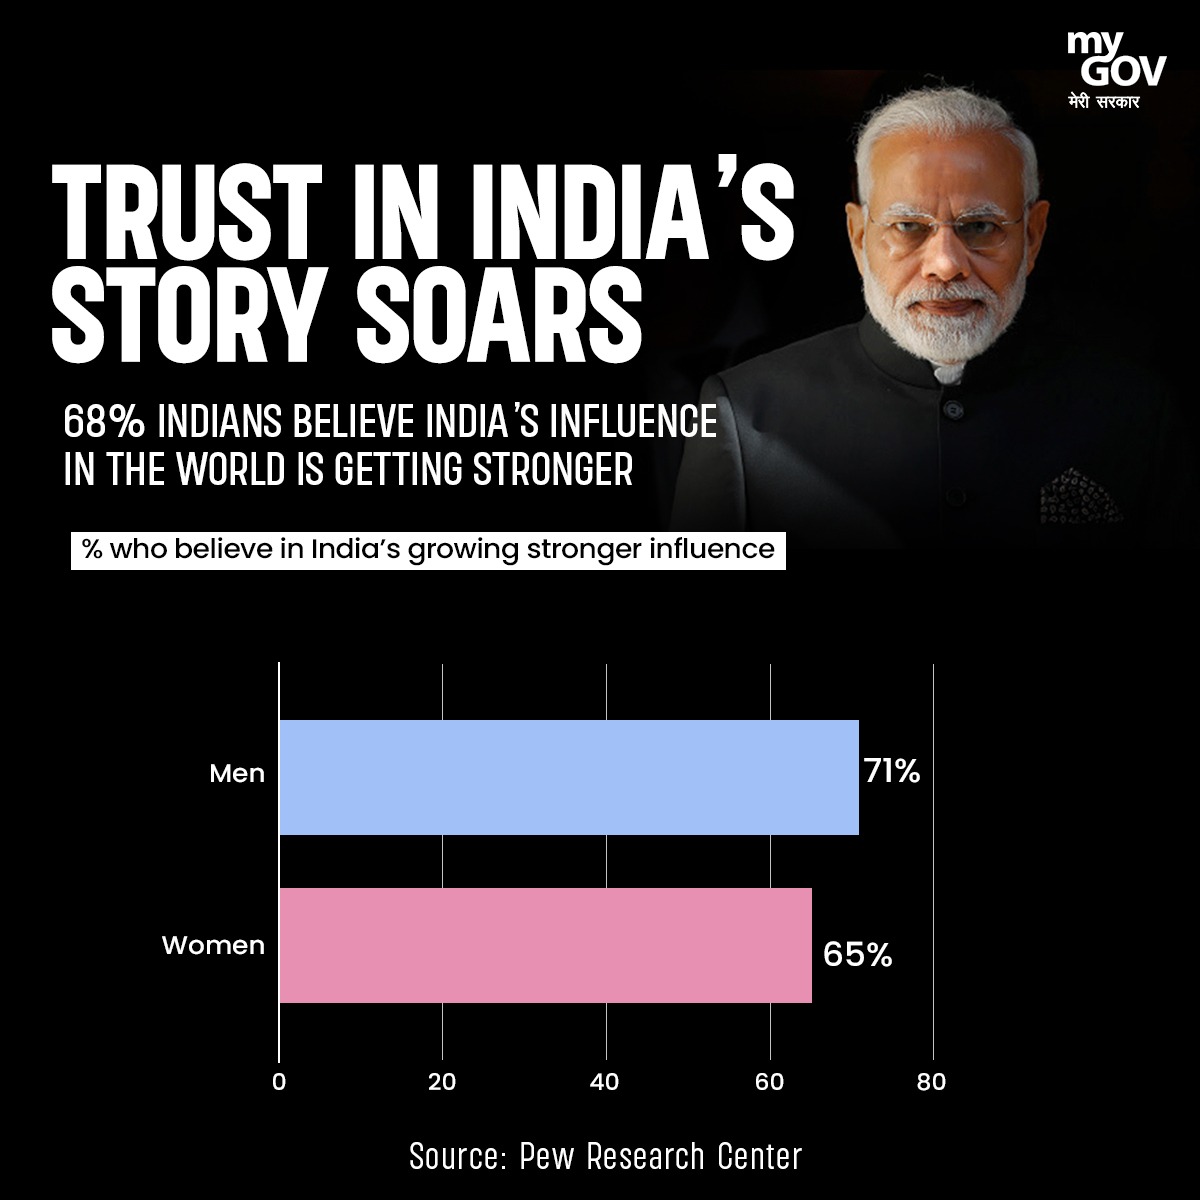 @narendramodi As the nation's story unfolds, so does the trust in its trajectory.

68% of Indians now firmly believe in India's growing influence on the global stage. 🌎📈 

#IndiaRising 
#GlobalInfluence 
#IndiaLeadership